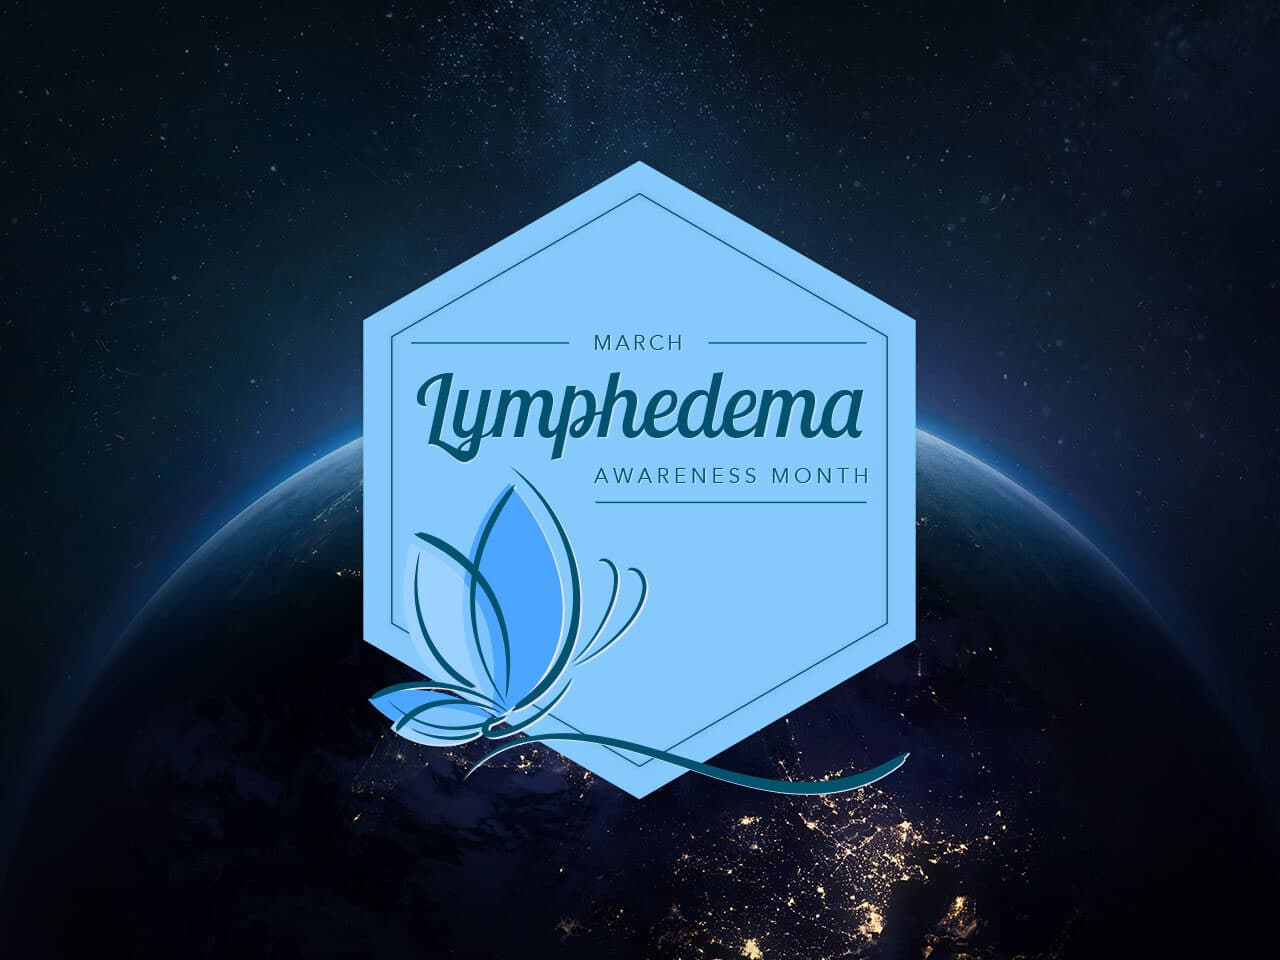 Countdown to World Lymphedema Day, March 6